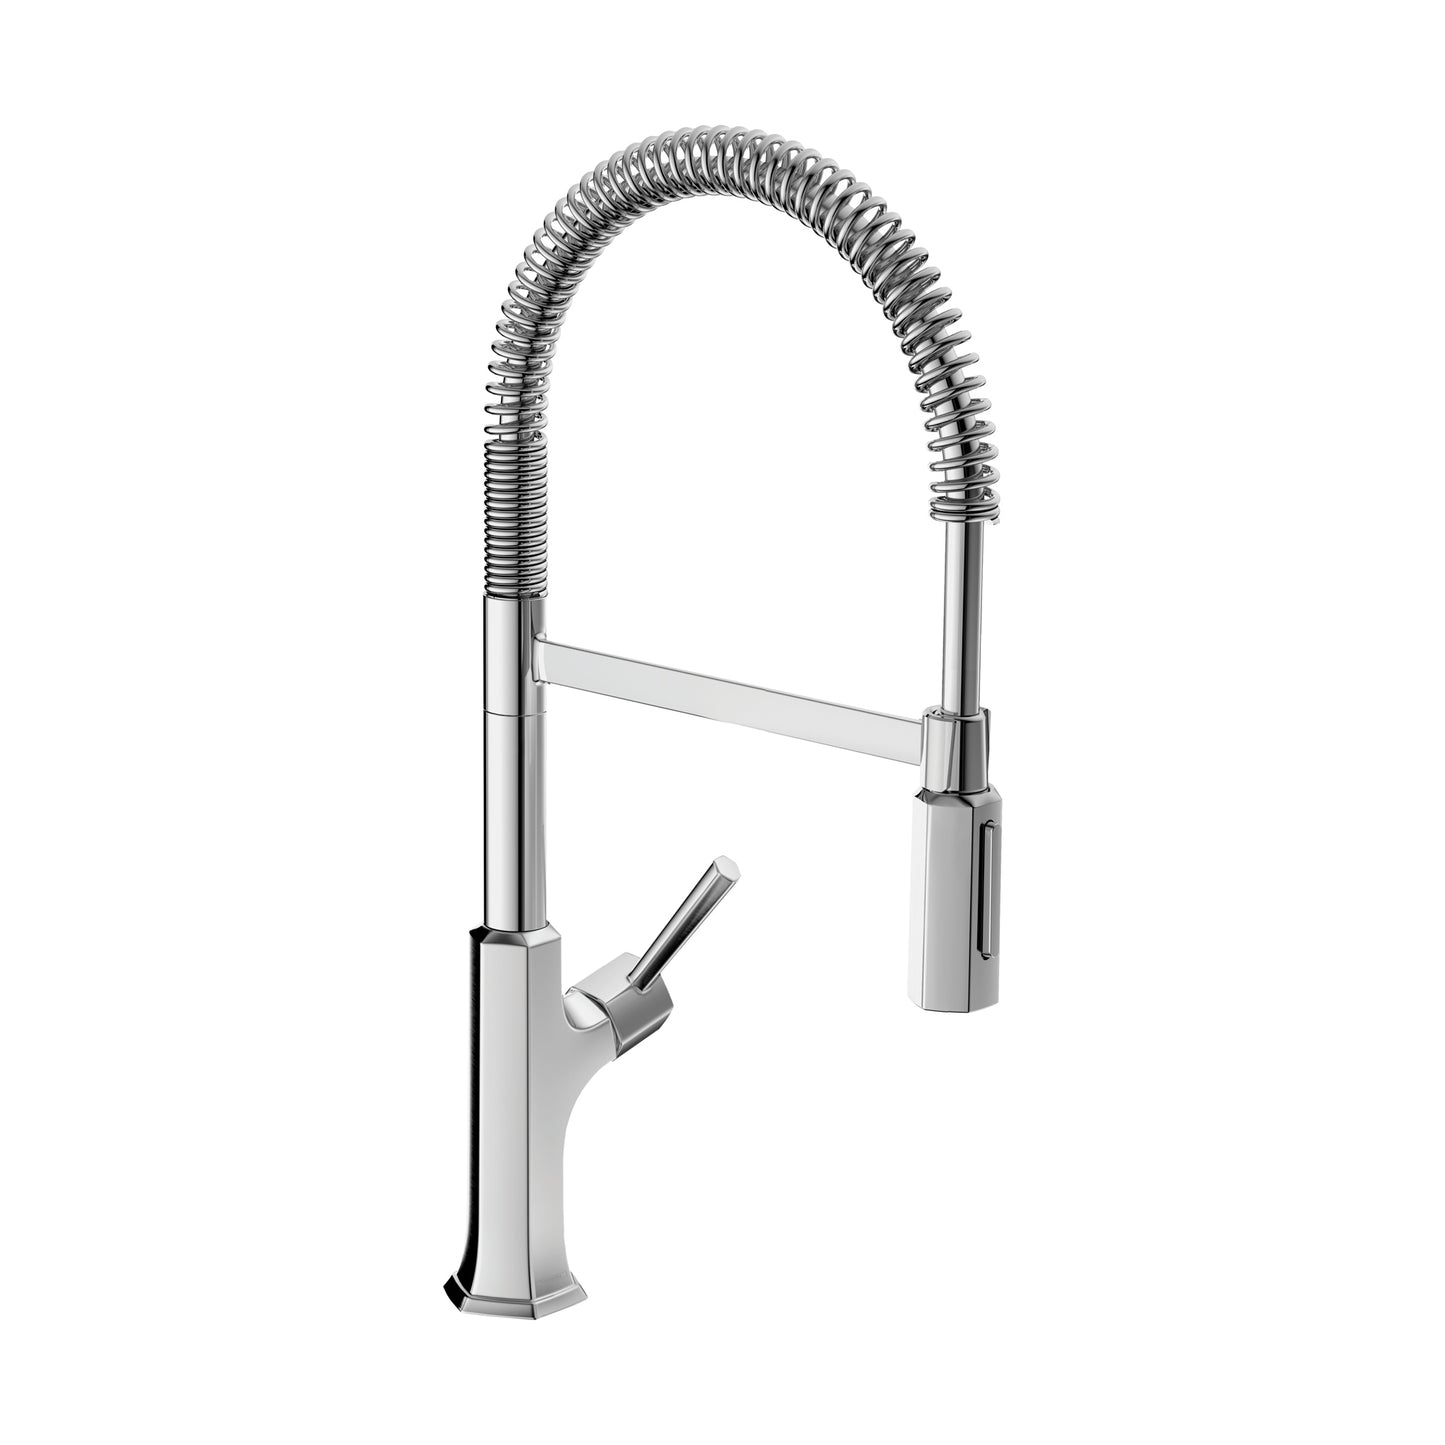 HANSGROHE 04851000 Chrome Locarno Transitional Kitchen Faucet 1.75 GPM